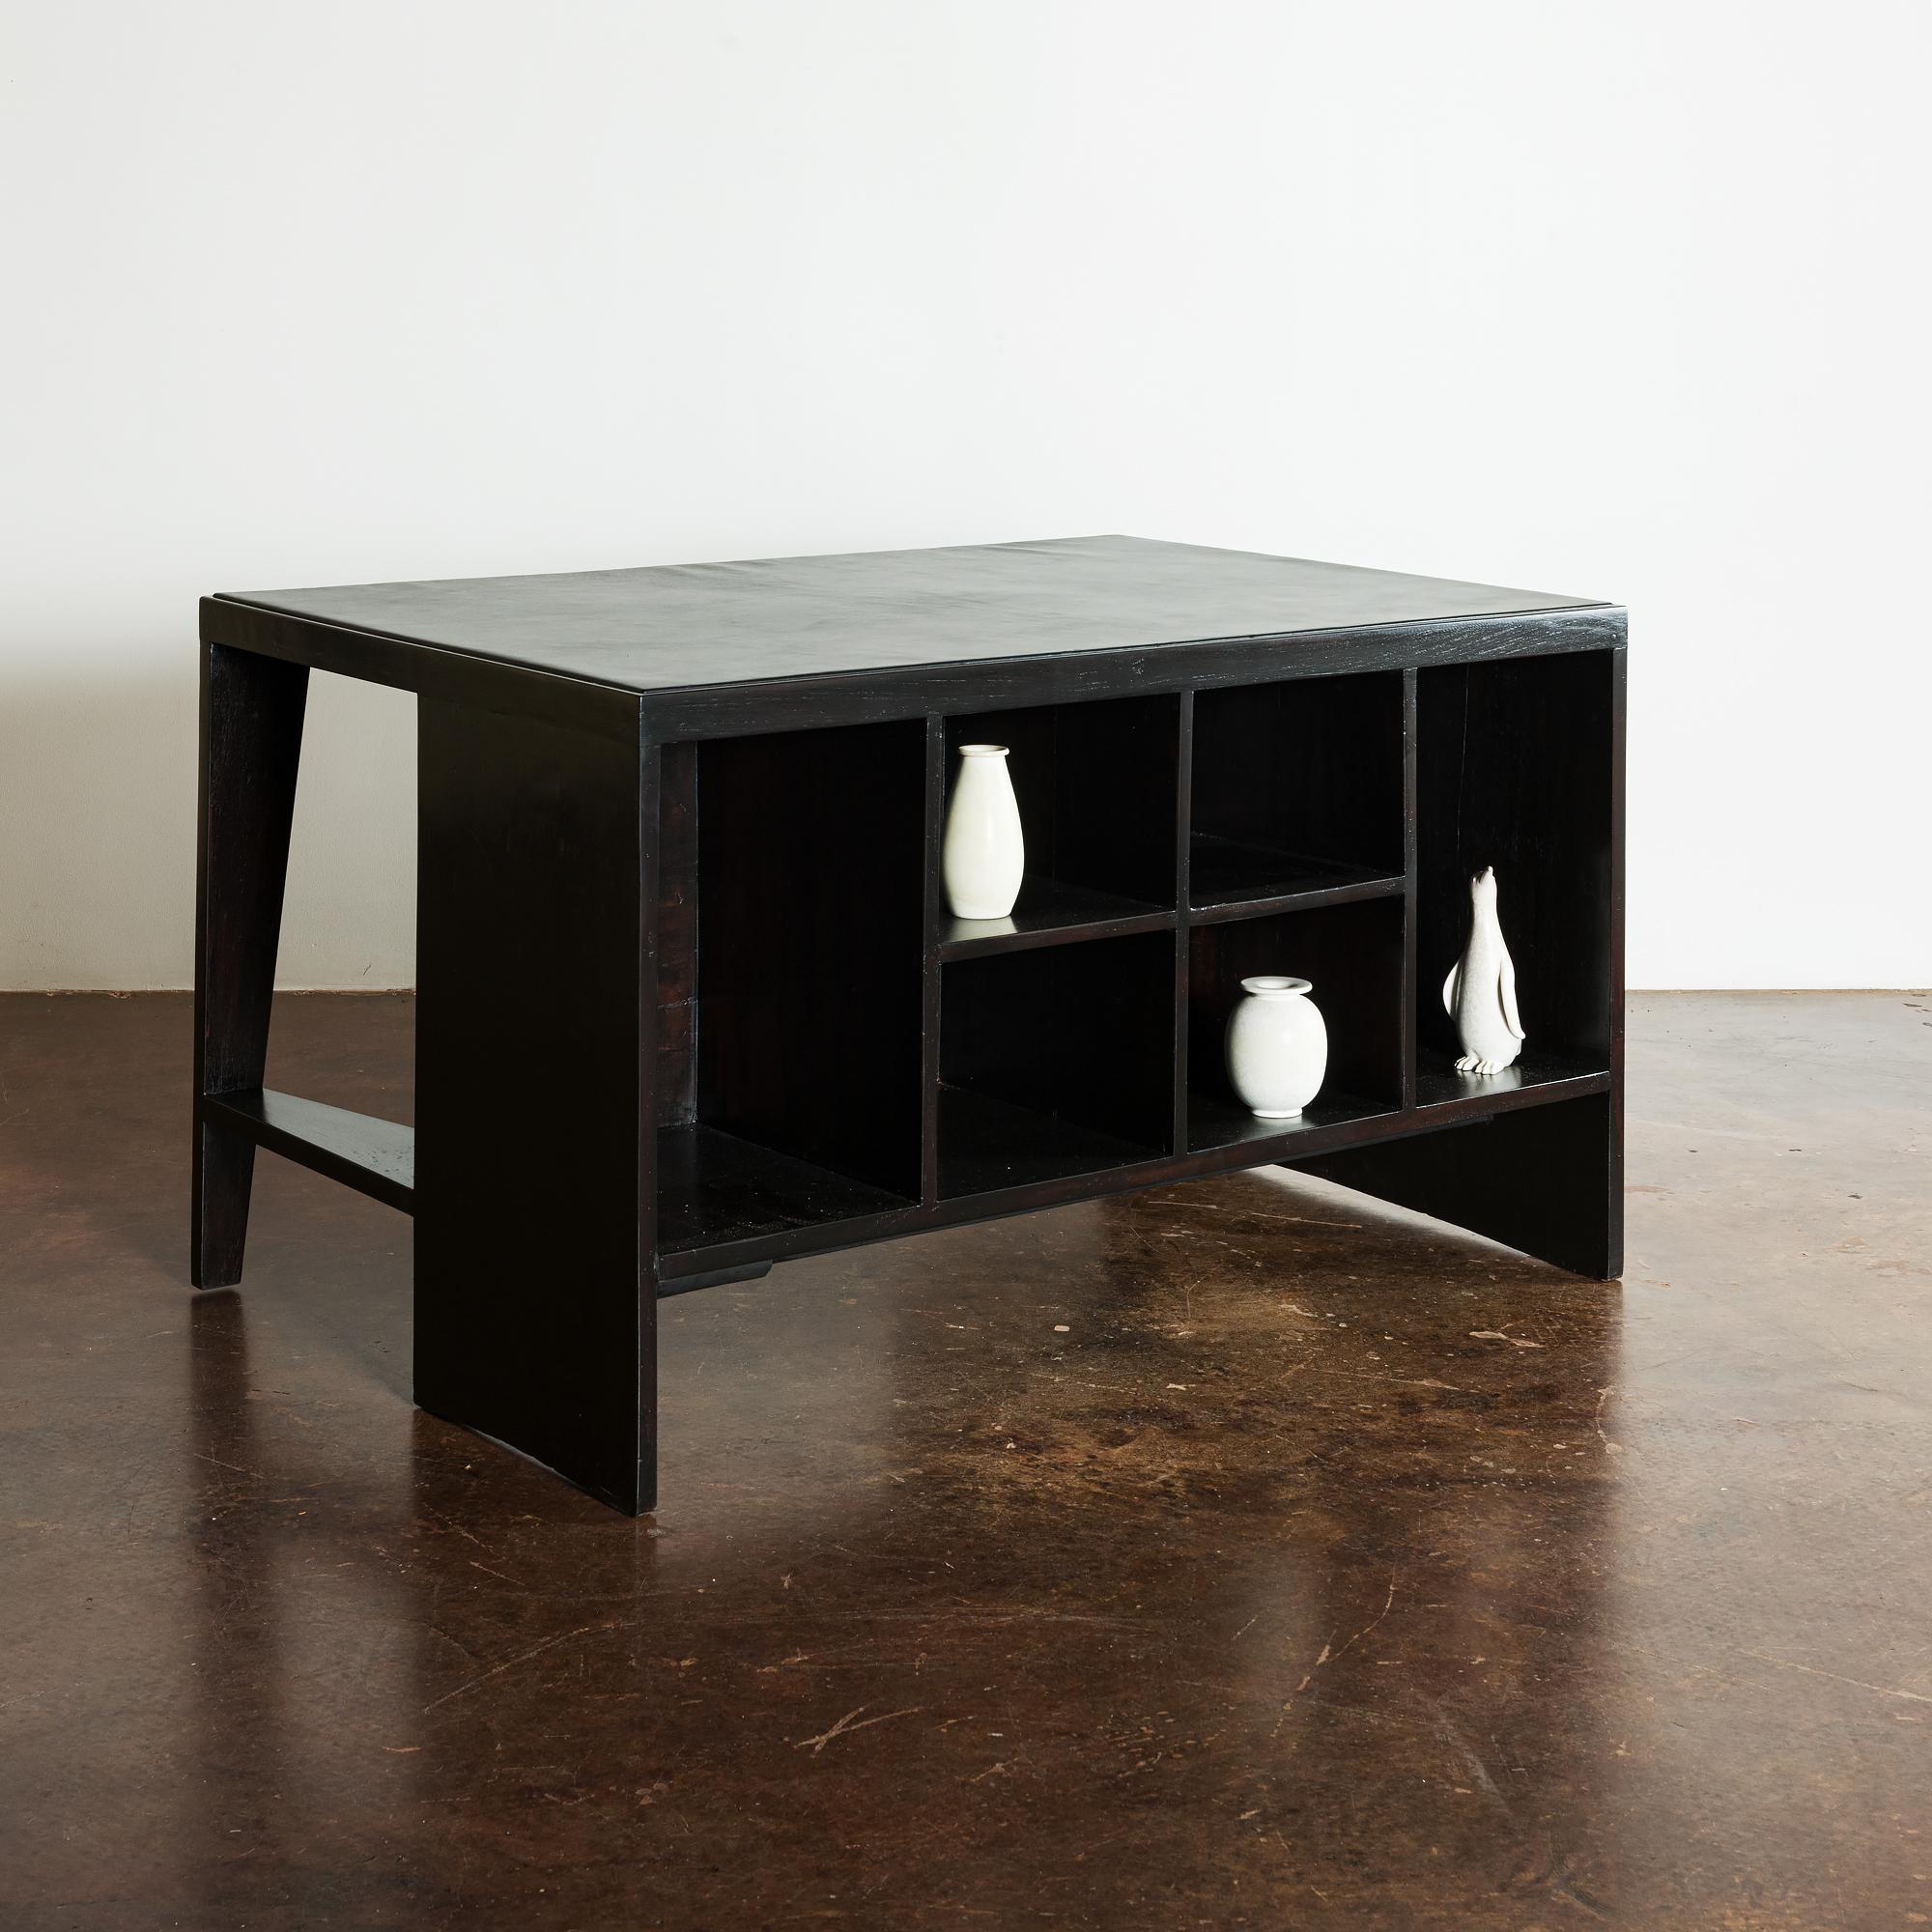 Iconic office desk in rosewood by Pierre Jeanneret for the administration buildings in Chandigarh, India, 1950s. Elegantly refinished in black stain and a black leather desktop.